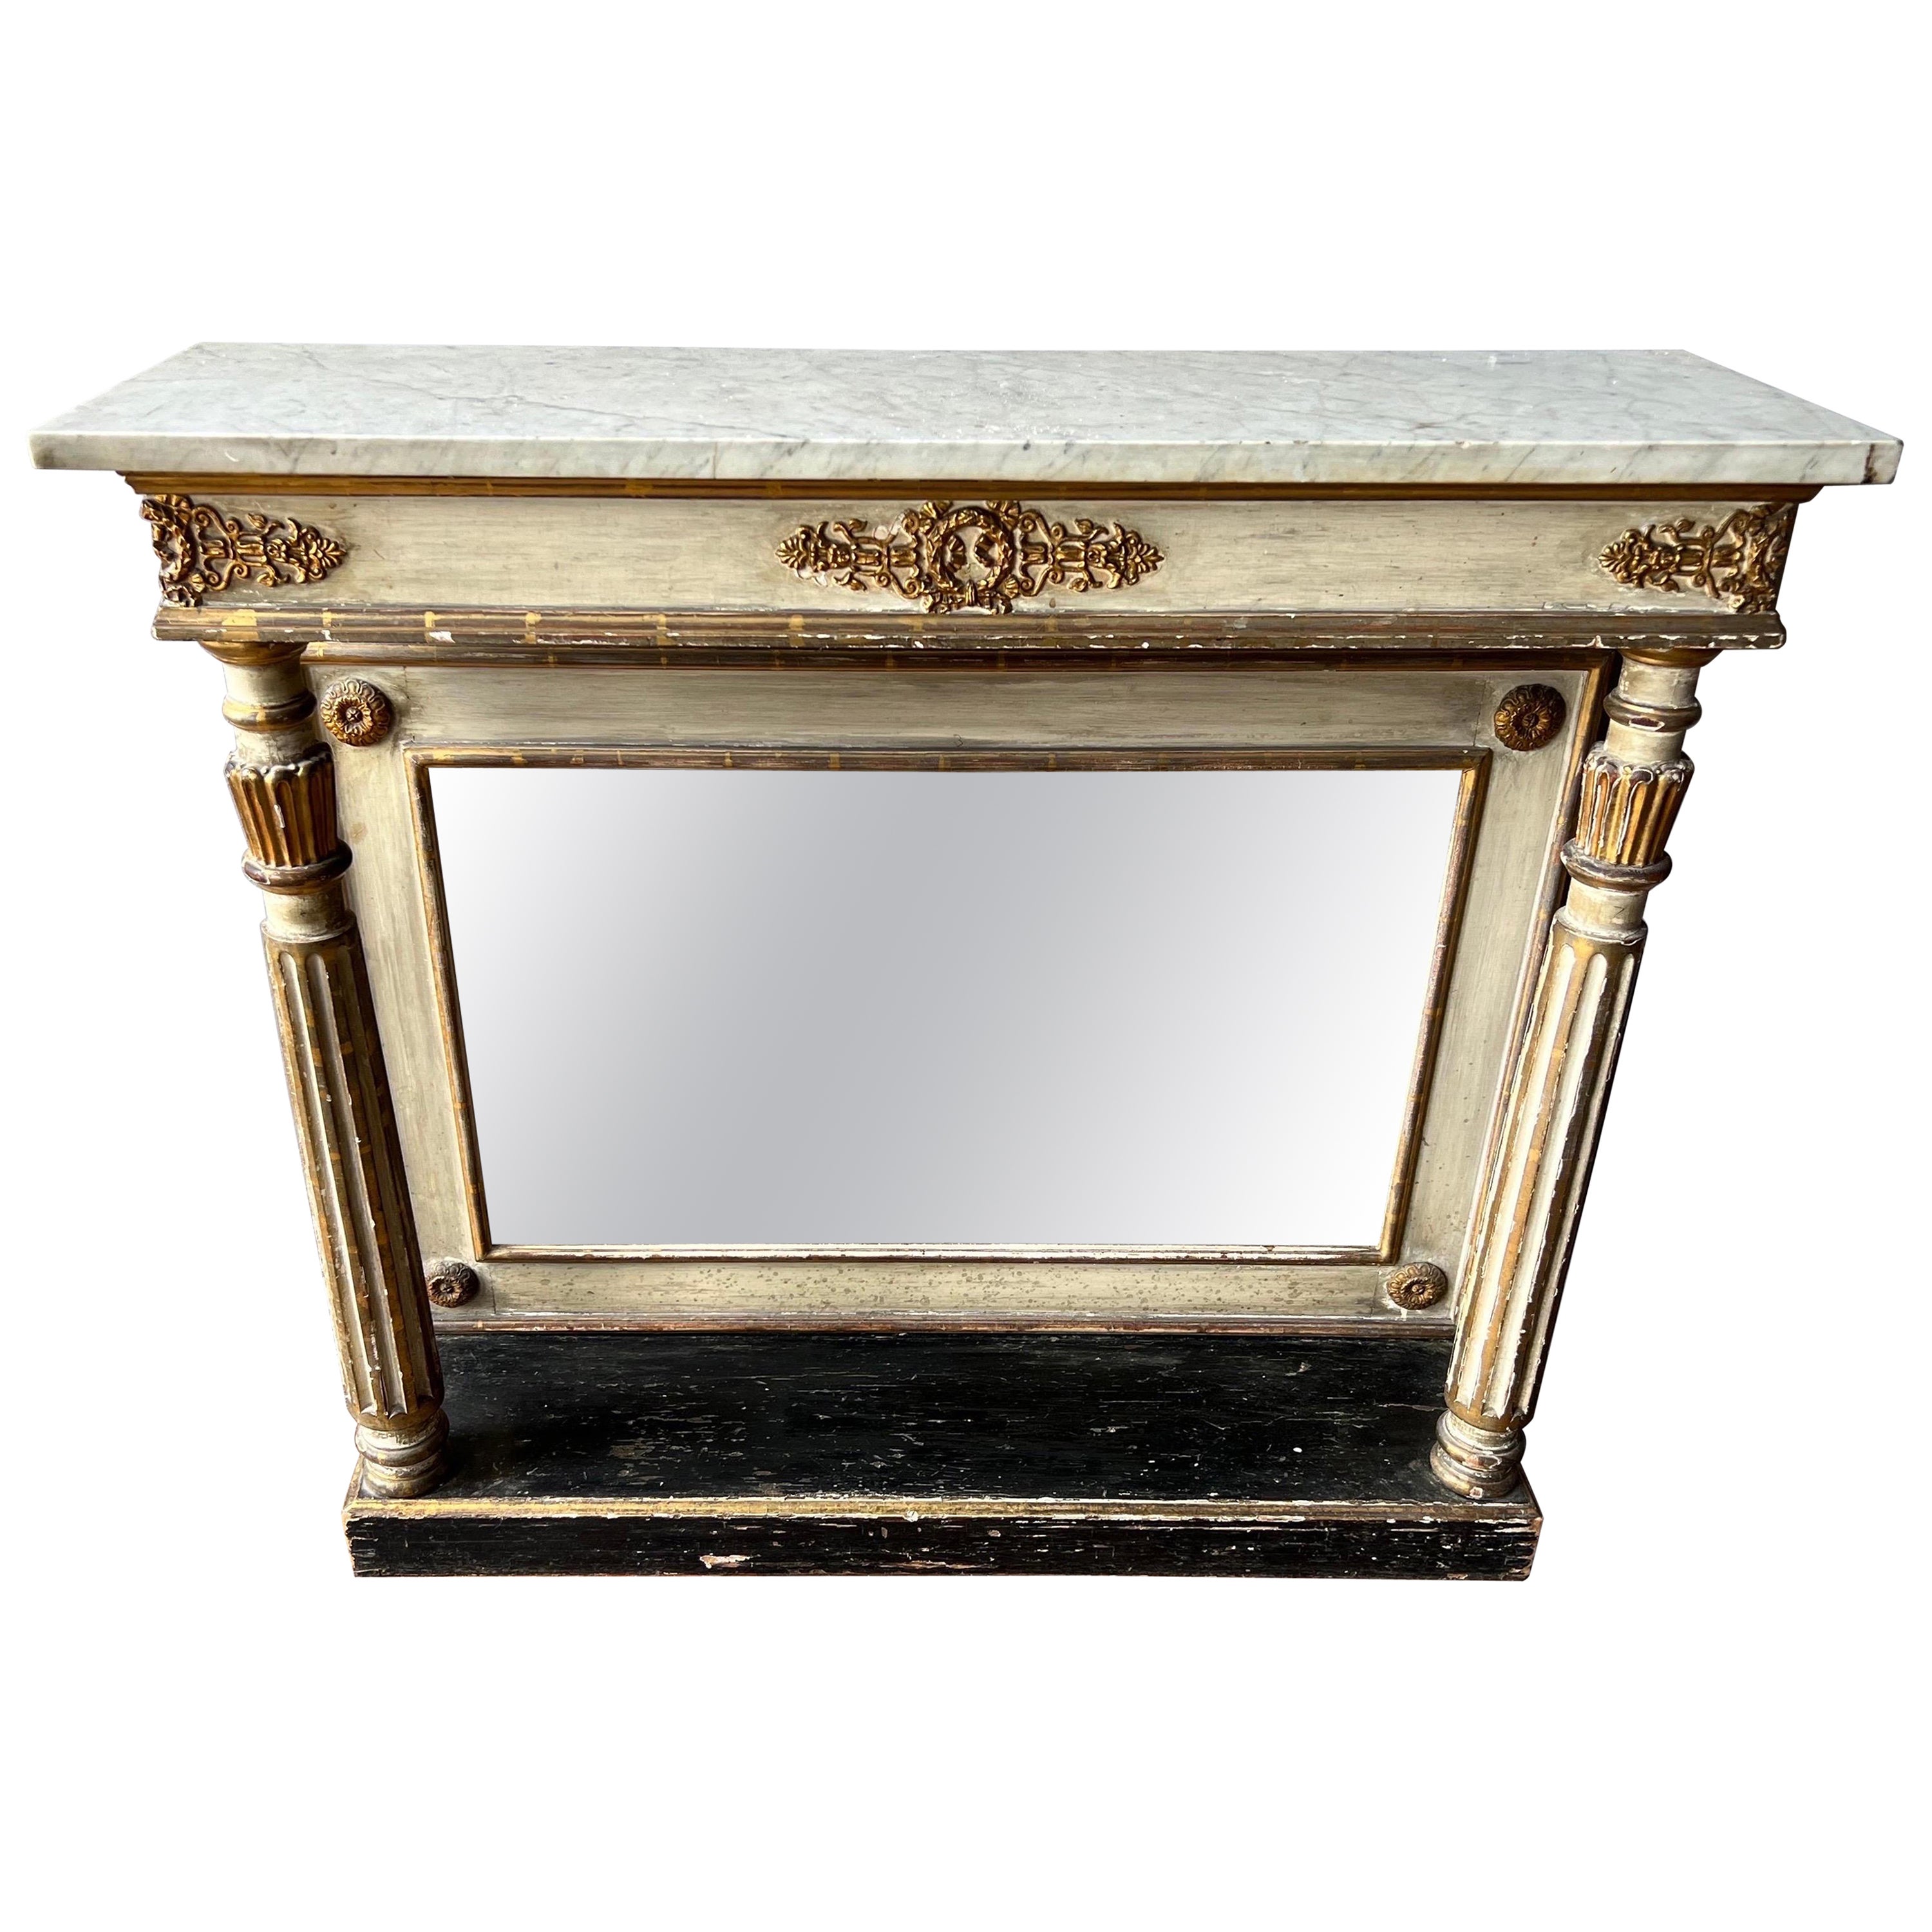 Late 18th, Early 19th Century French Painted and Giltwood Mirrored Console